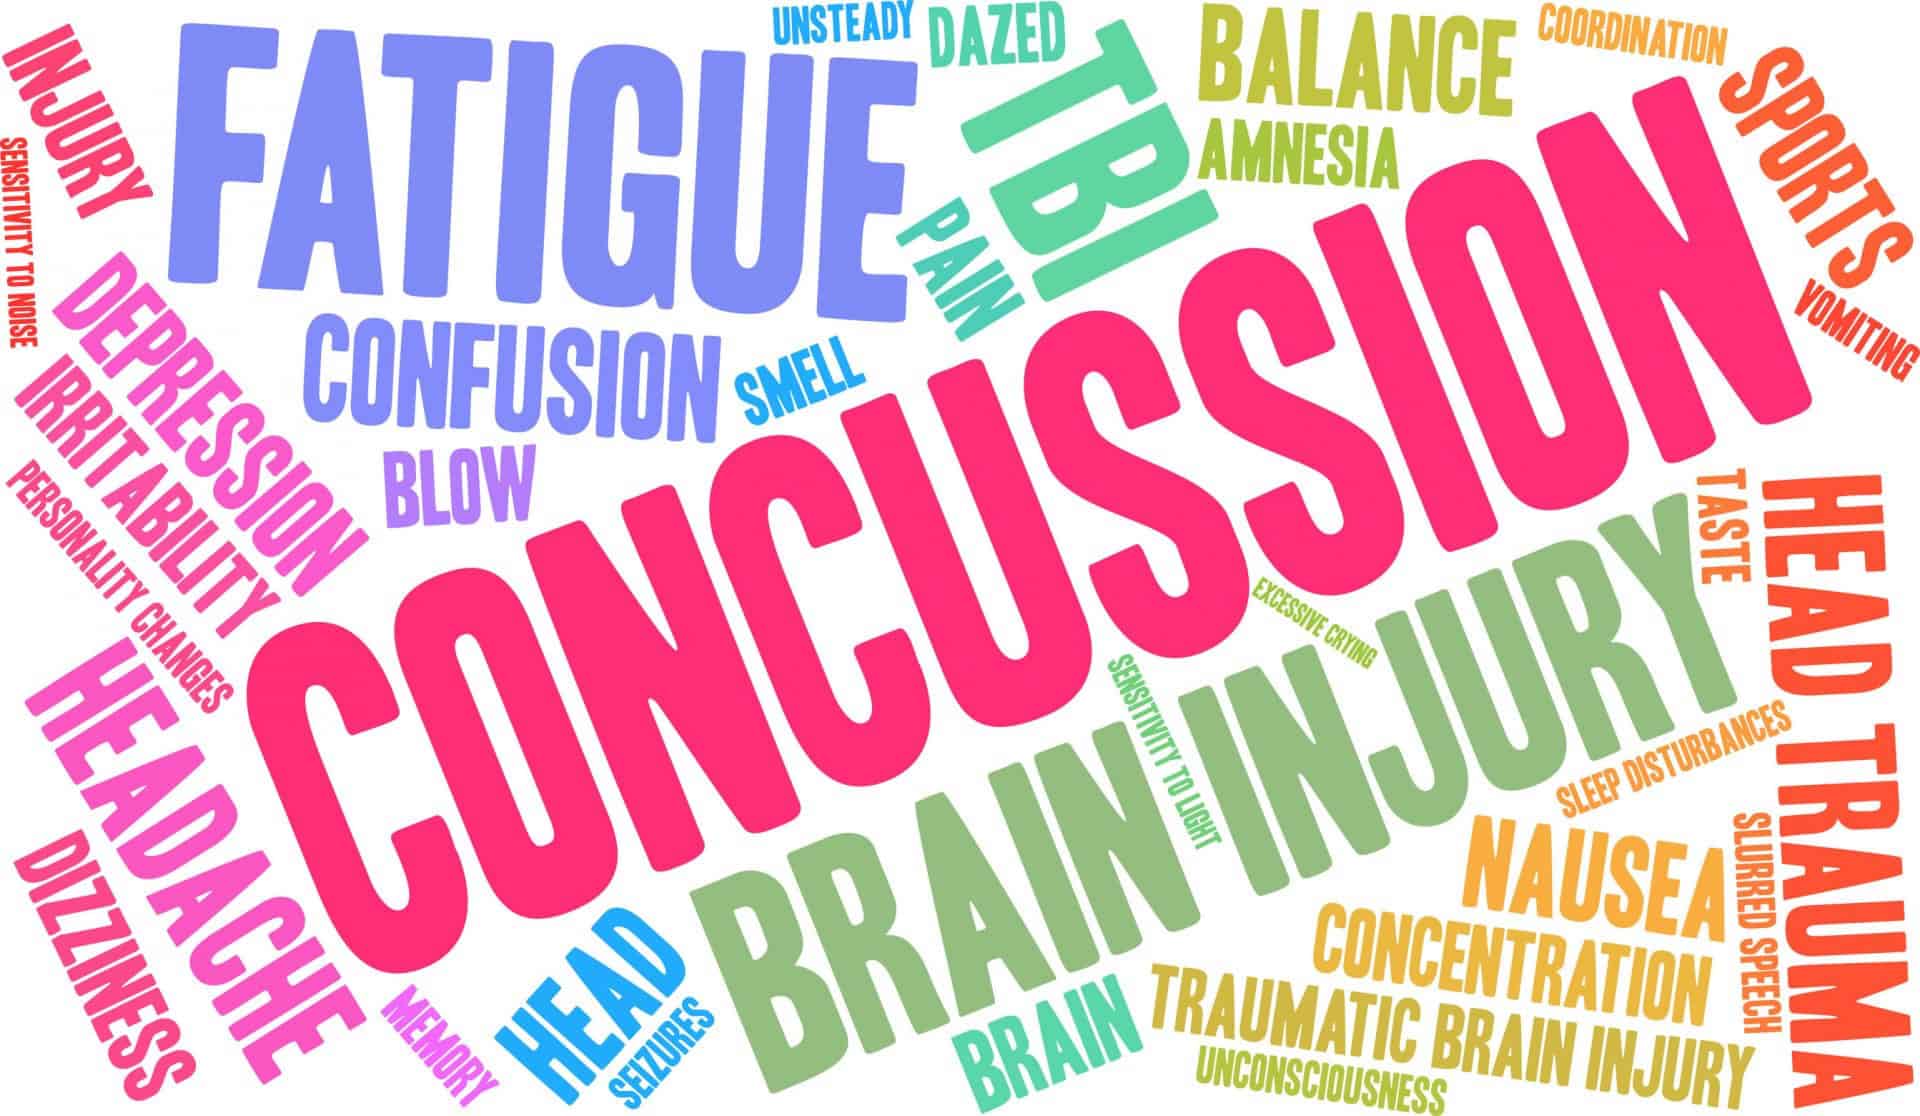 Concussion – Common and Resolvable With Reliable Care